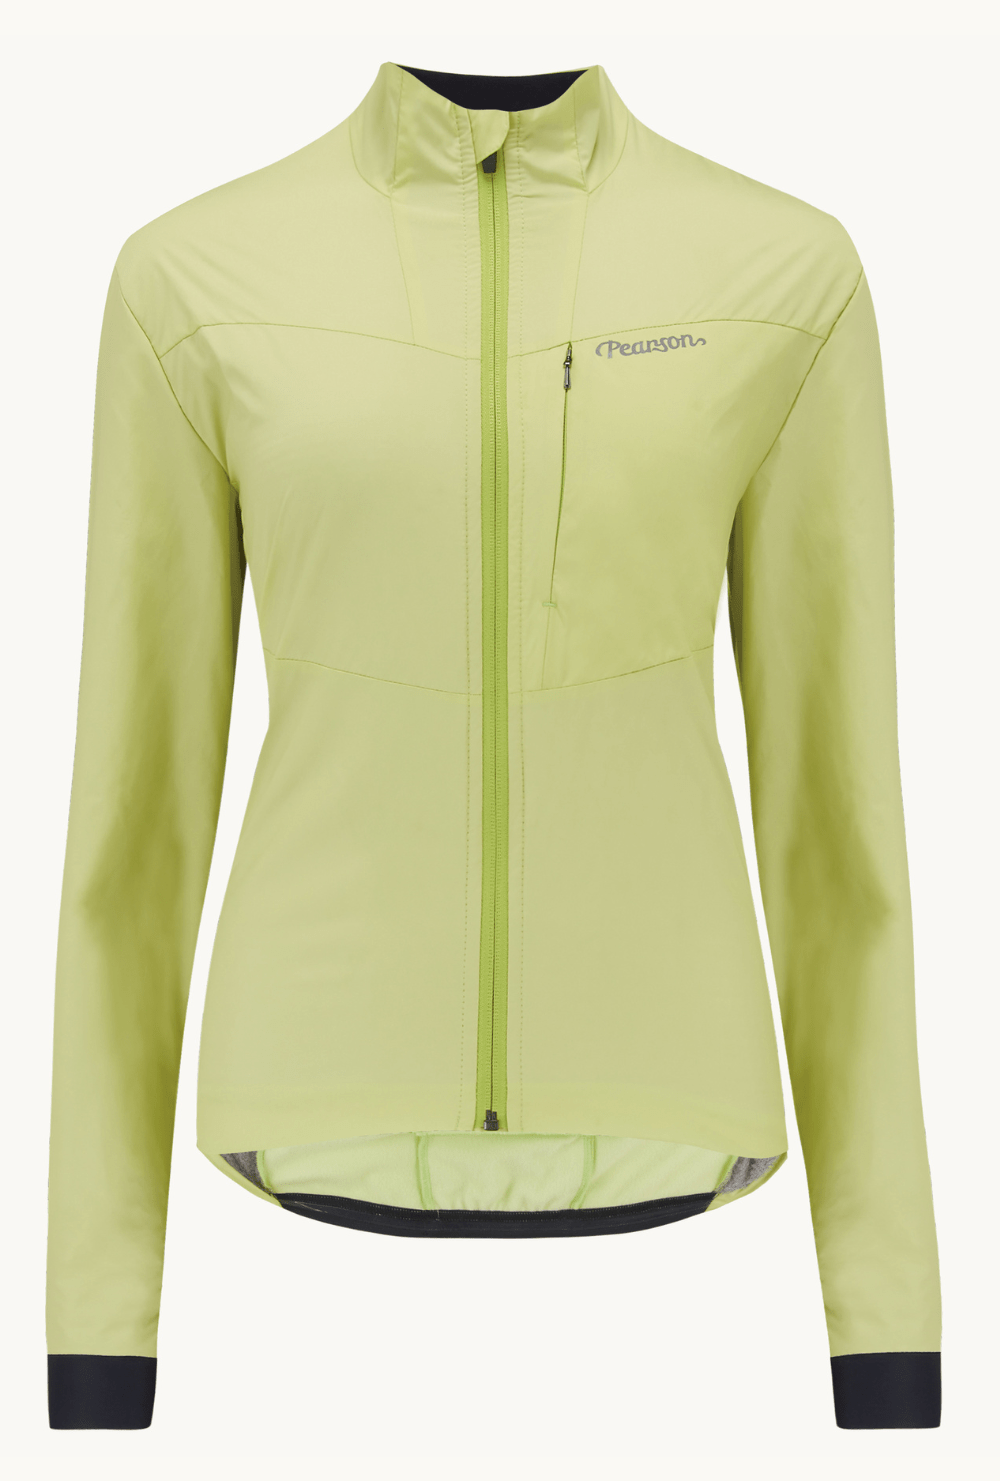 Pearson 1860  Test Your Mettle - Womens Road Insulated Jacket Shadow Lime  Shadow Lime / X-large